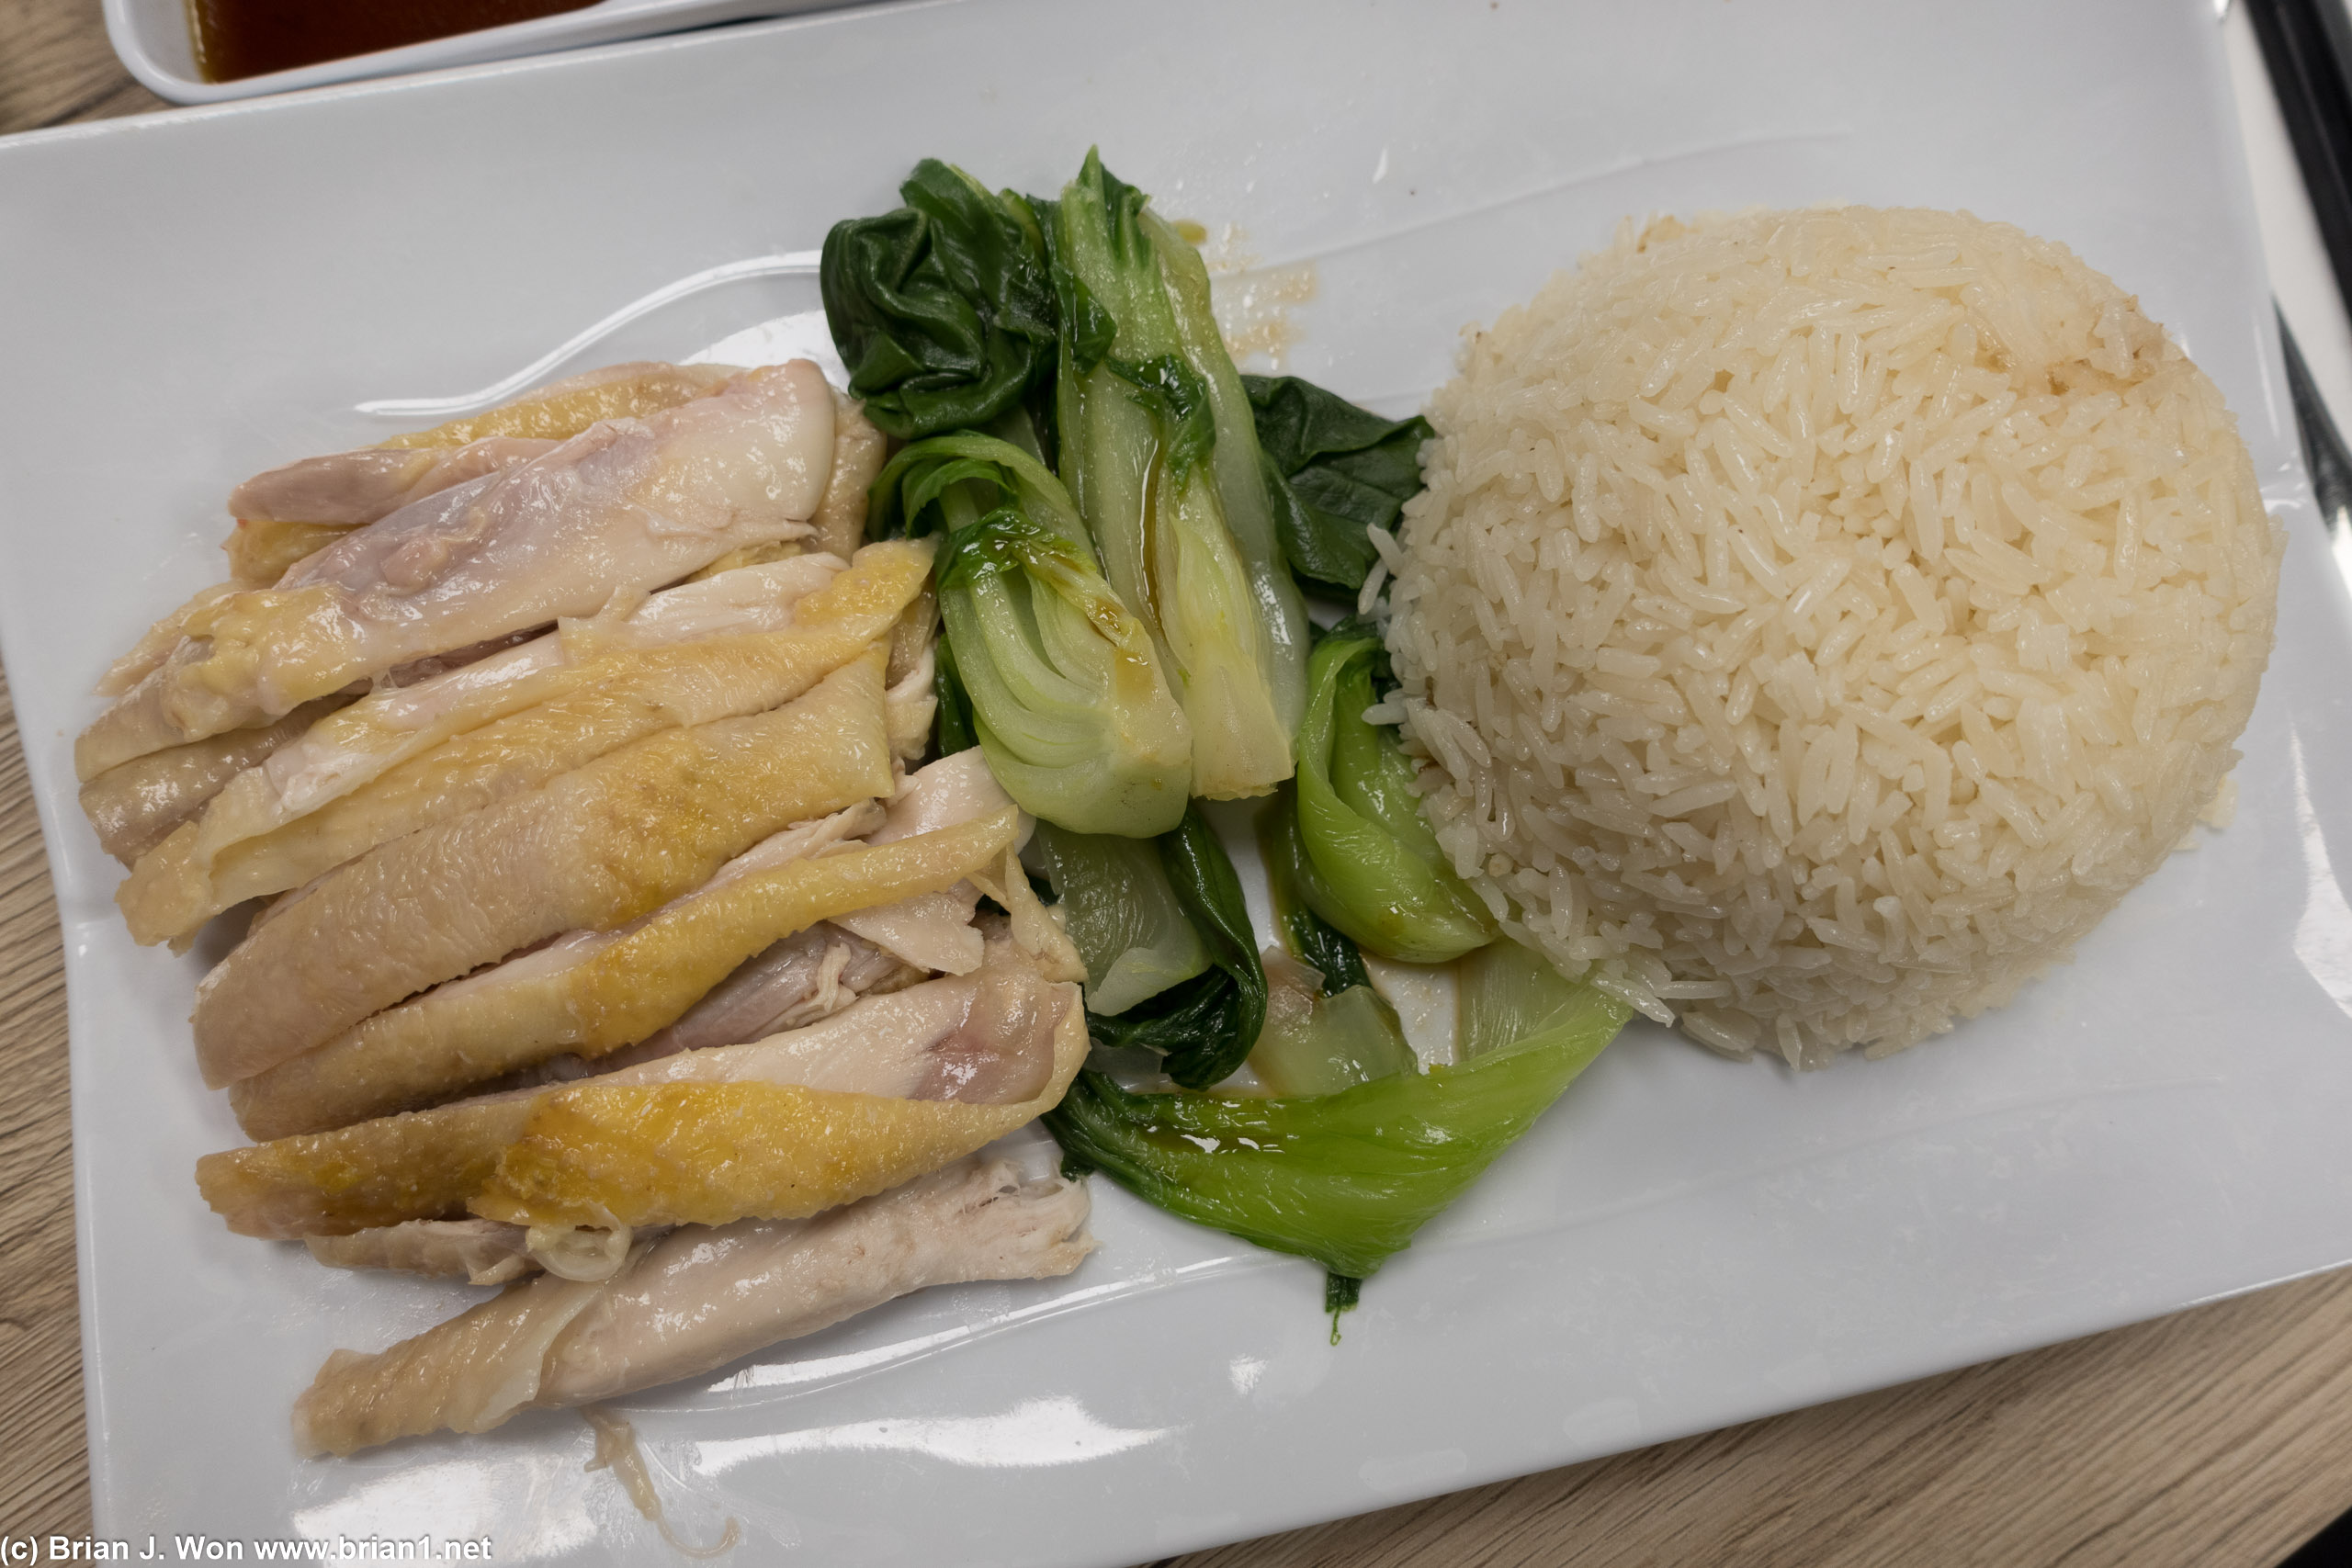 Close-up of the Hainan chicken.